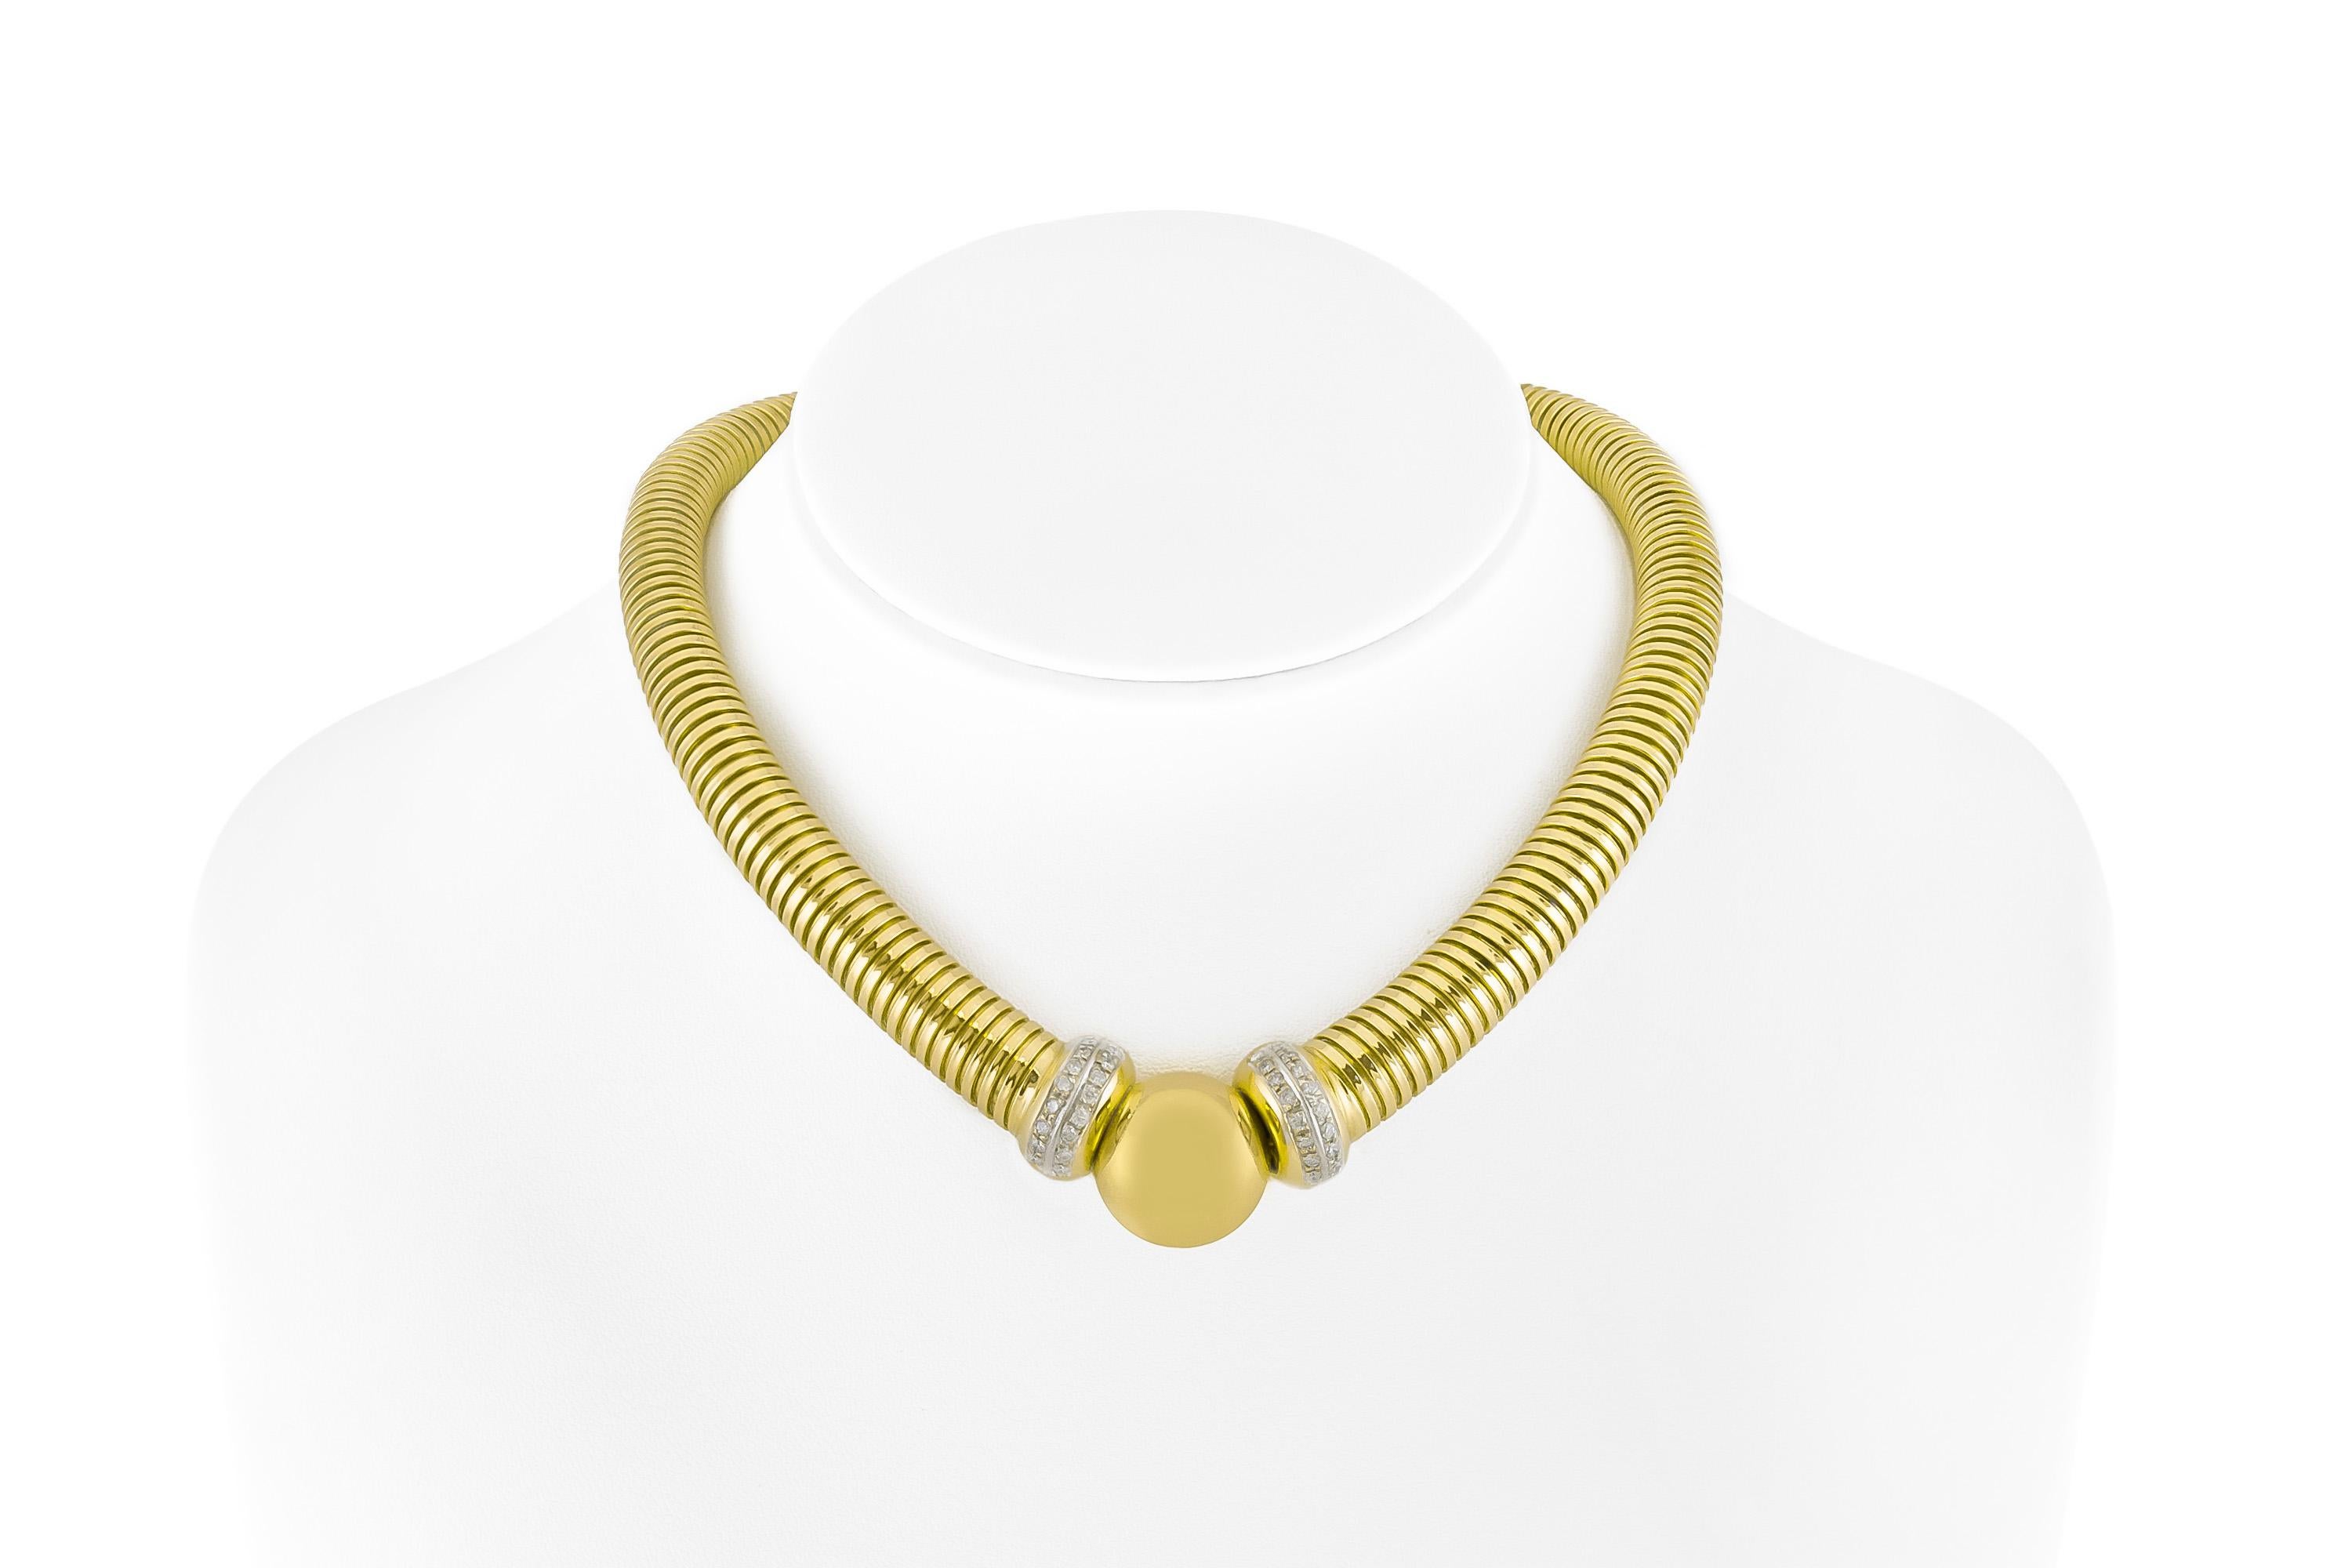 The neckalace is finely crafted in 18k yellow gold with diamonds in the center of the necklace weighing approximately total of 1.40.
Circa 1970.